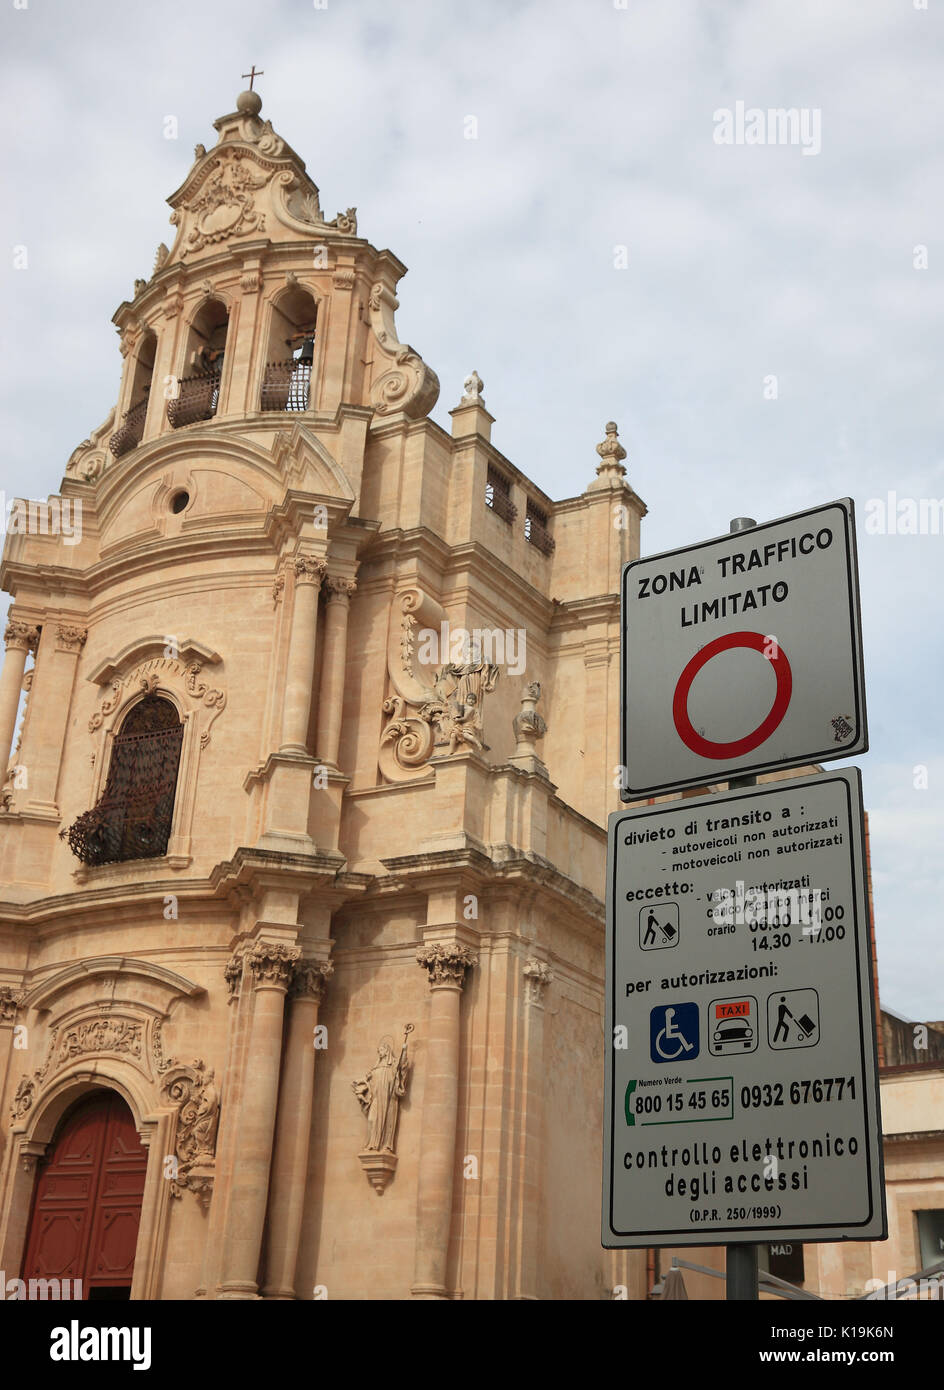 Sicily, town of Ragusa, church, Chiesa di San Giuseppe and traffic signs, traffic-calmed zone, in Piazza Pola in the late Baroque district Ragusa Ibla Stock Photo